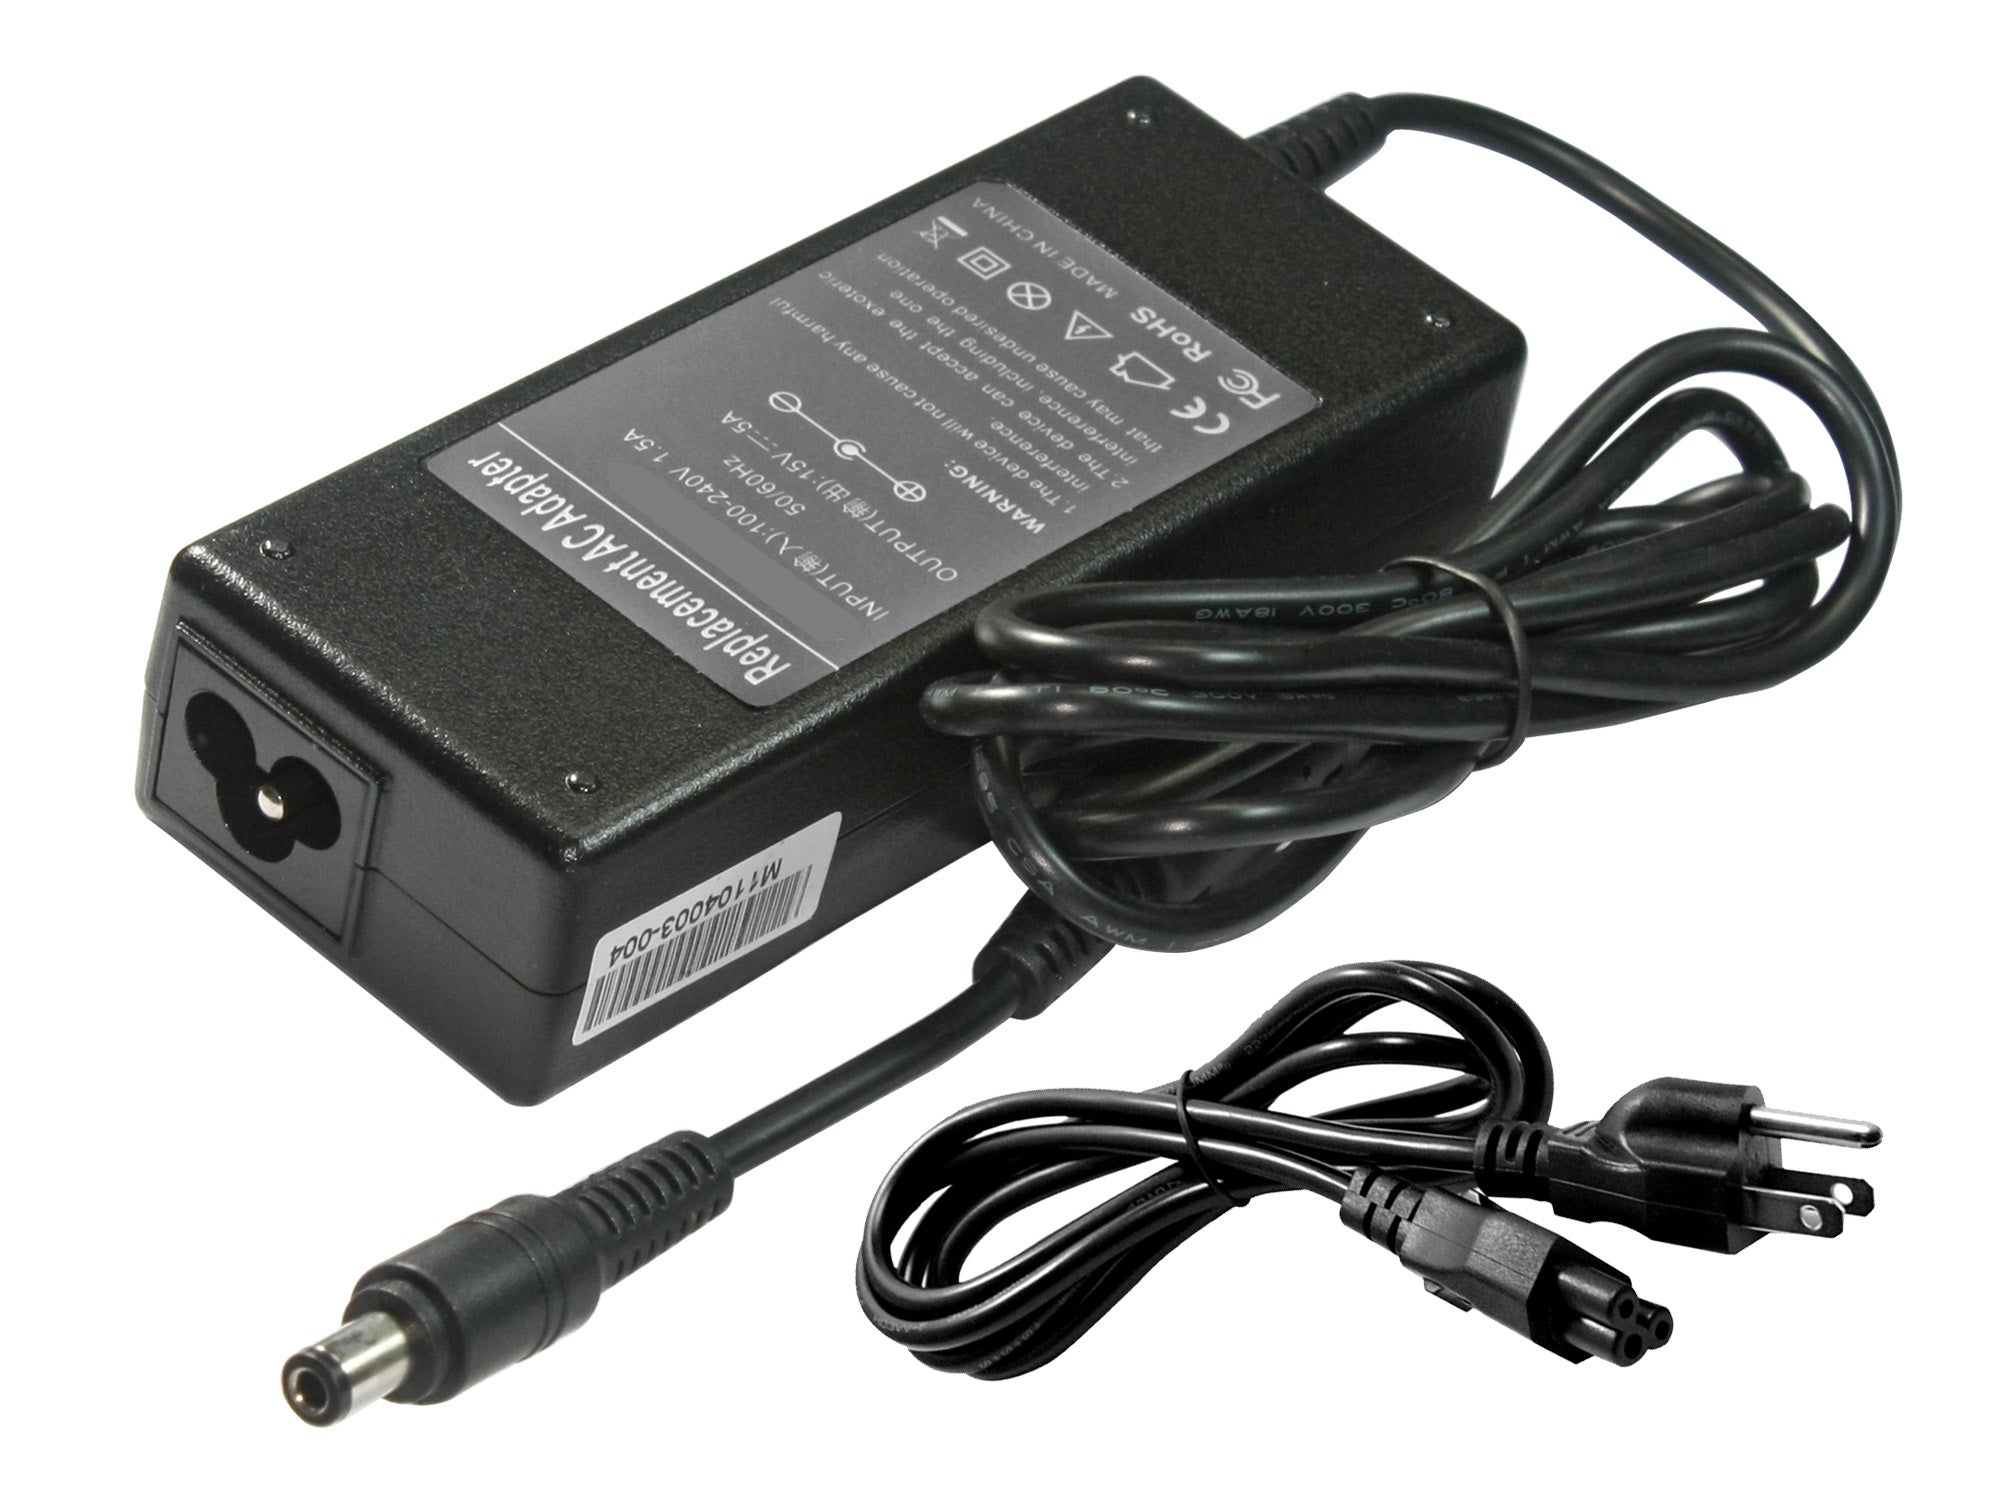 Compatible Replacement Toshiba Satellite A105-S4002 AC Adapter 75Watt 15V 5A.